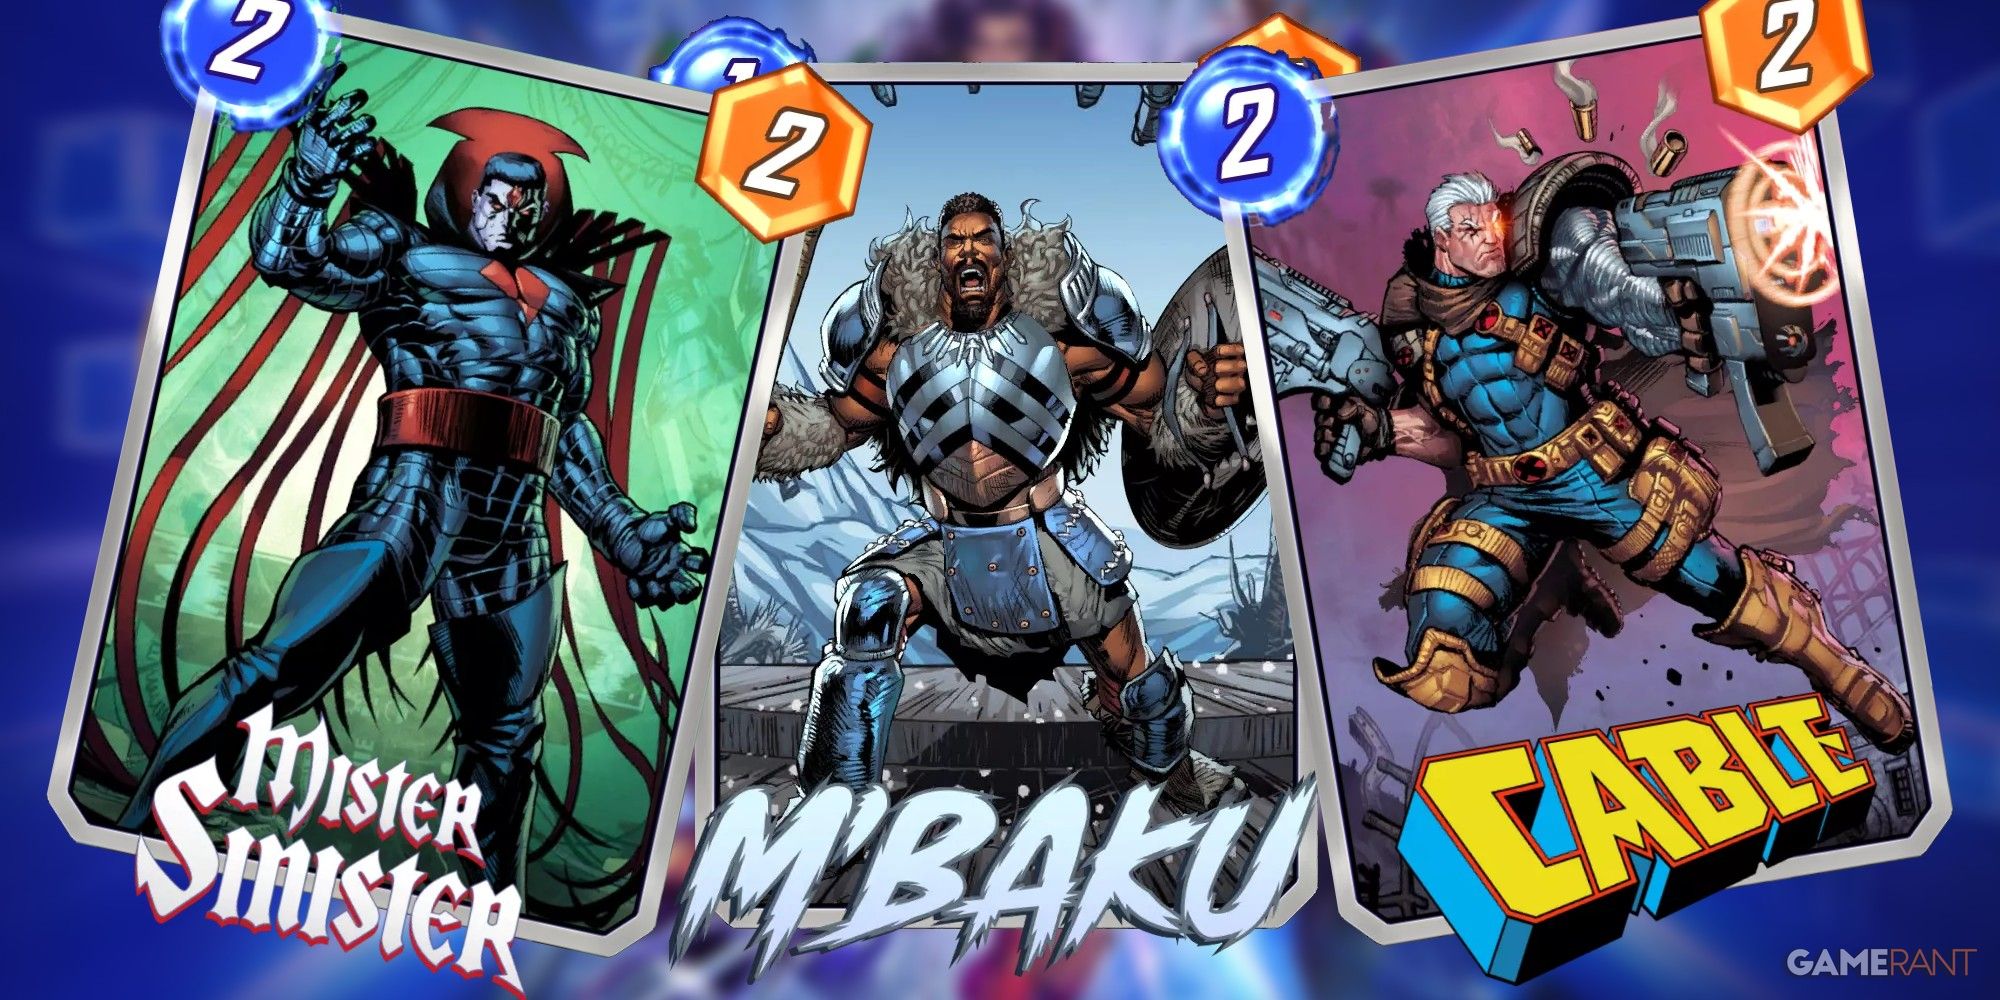 mister sinister, m'baku, and cable cards